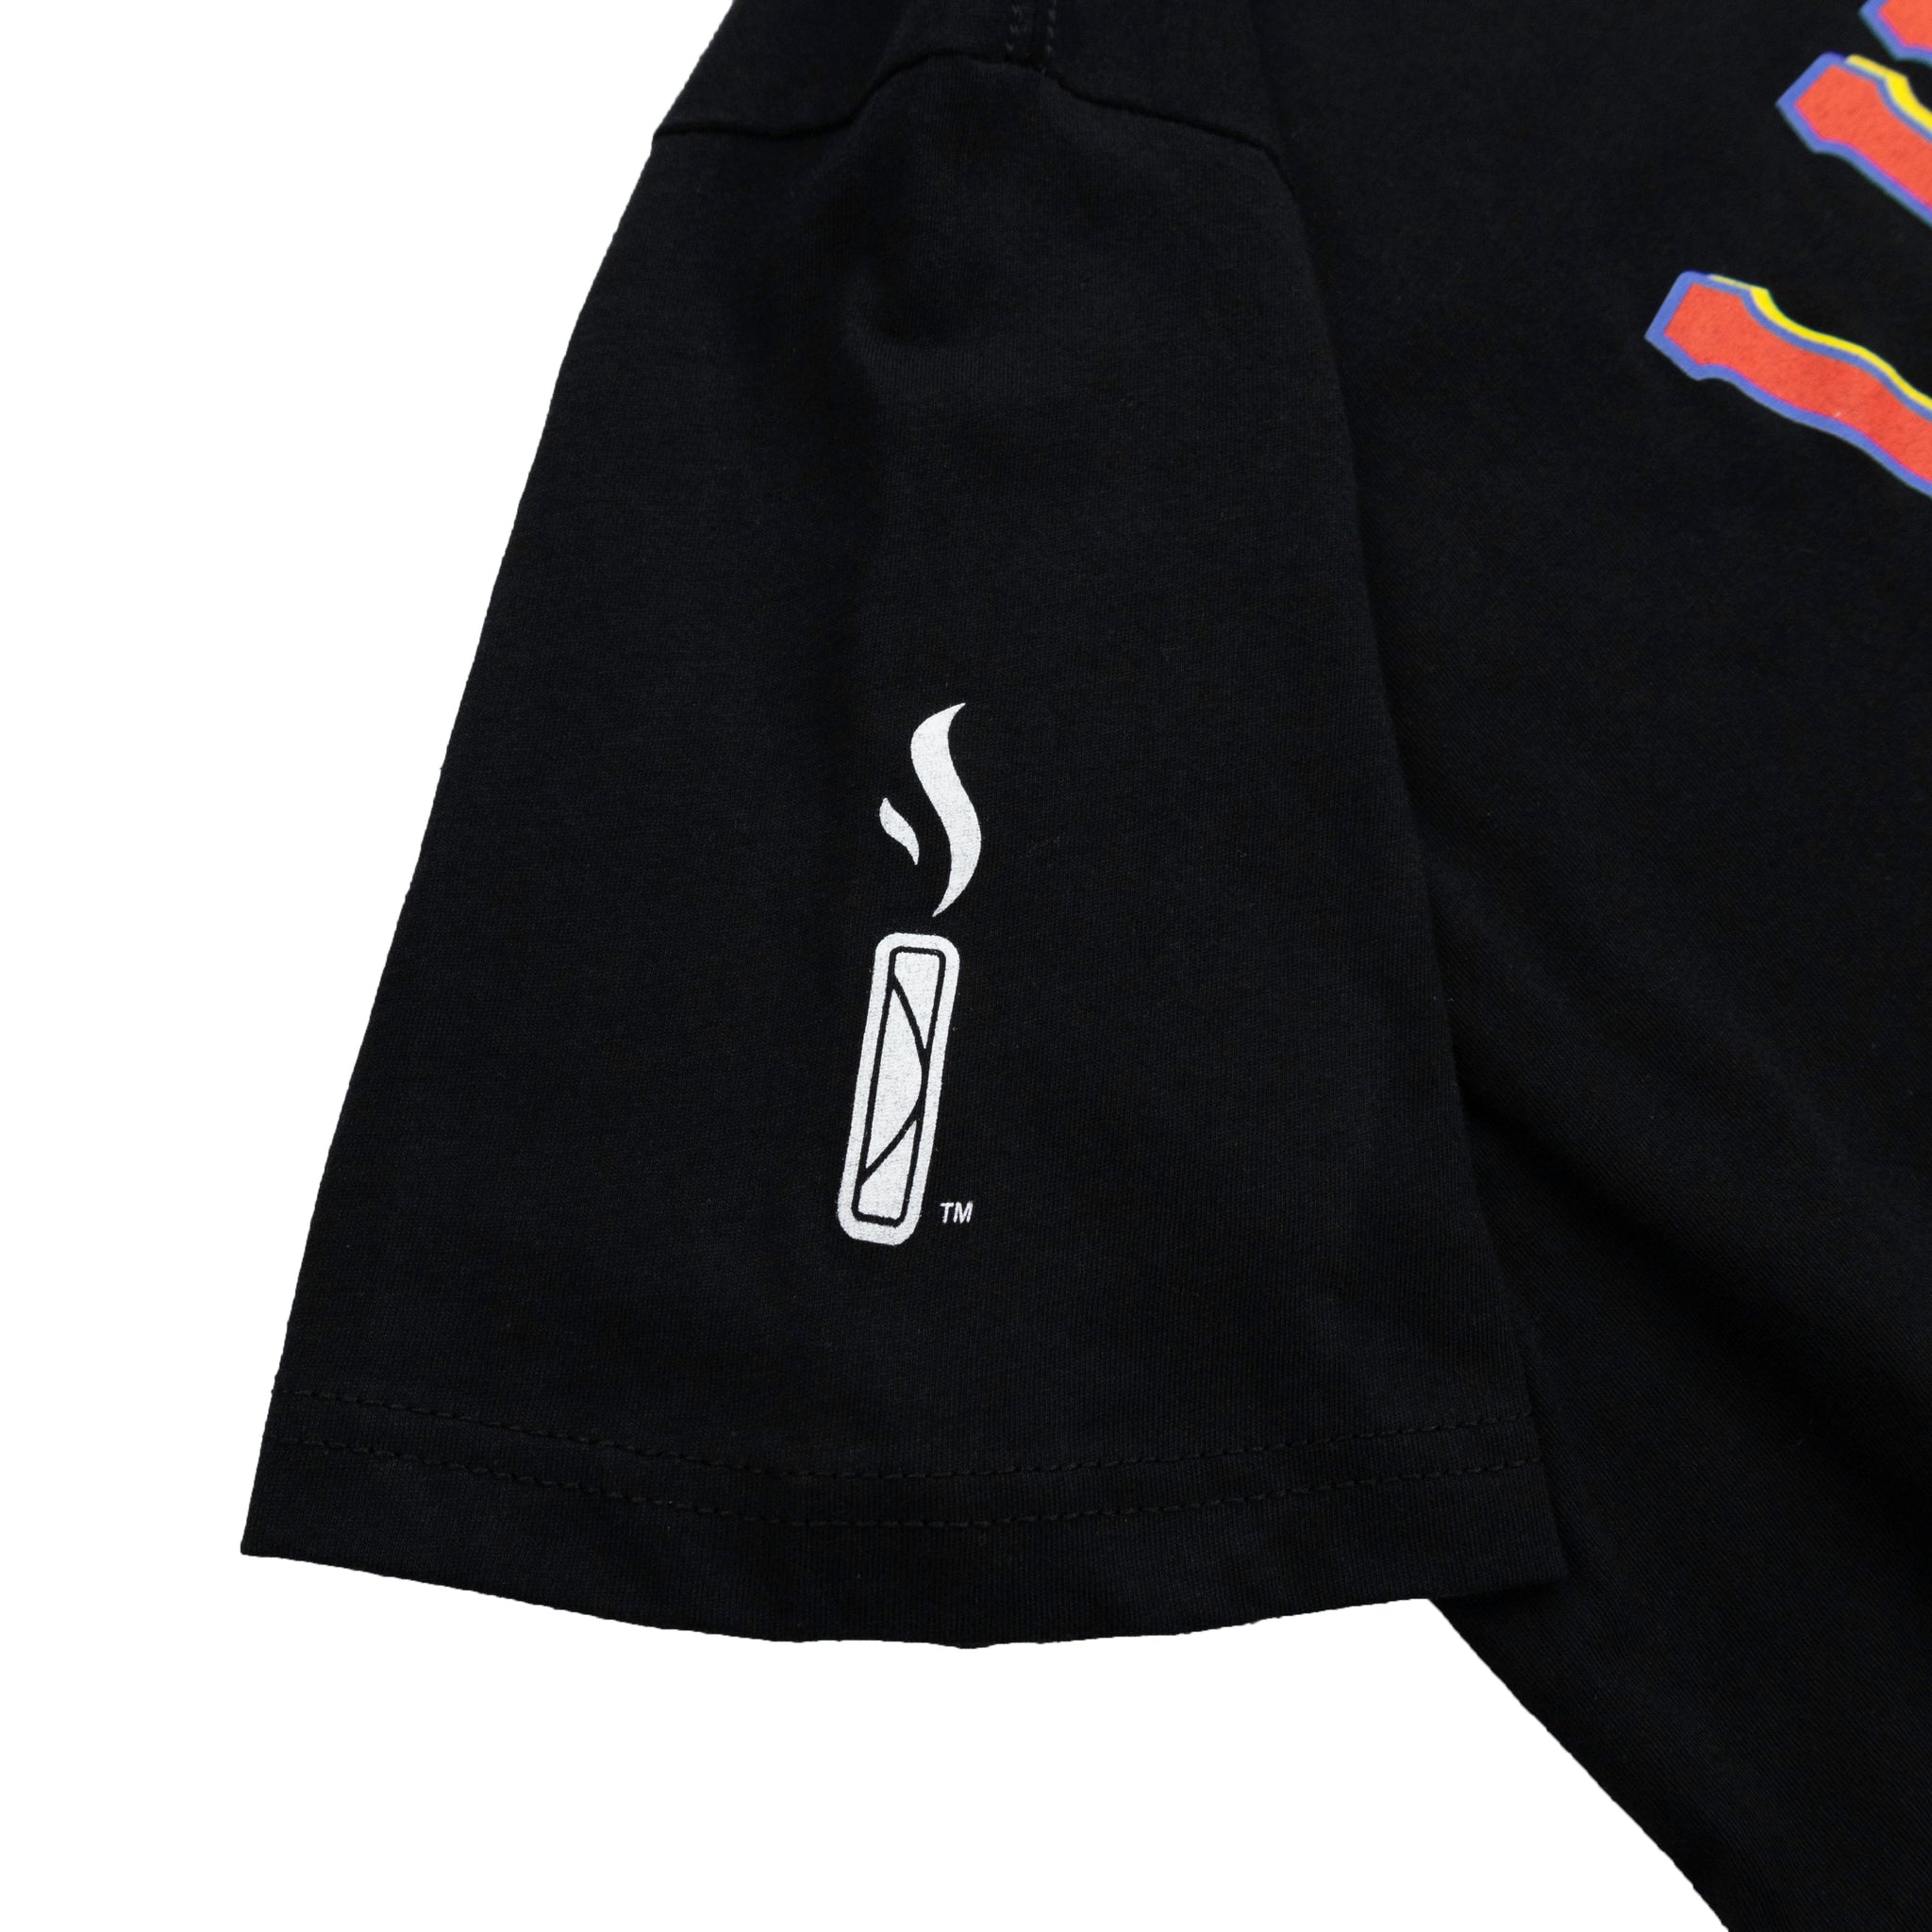 LUMPIA Jersey SF Giants Inspired (SAVS Collab) – The Lumpia Company